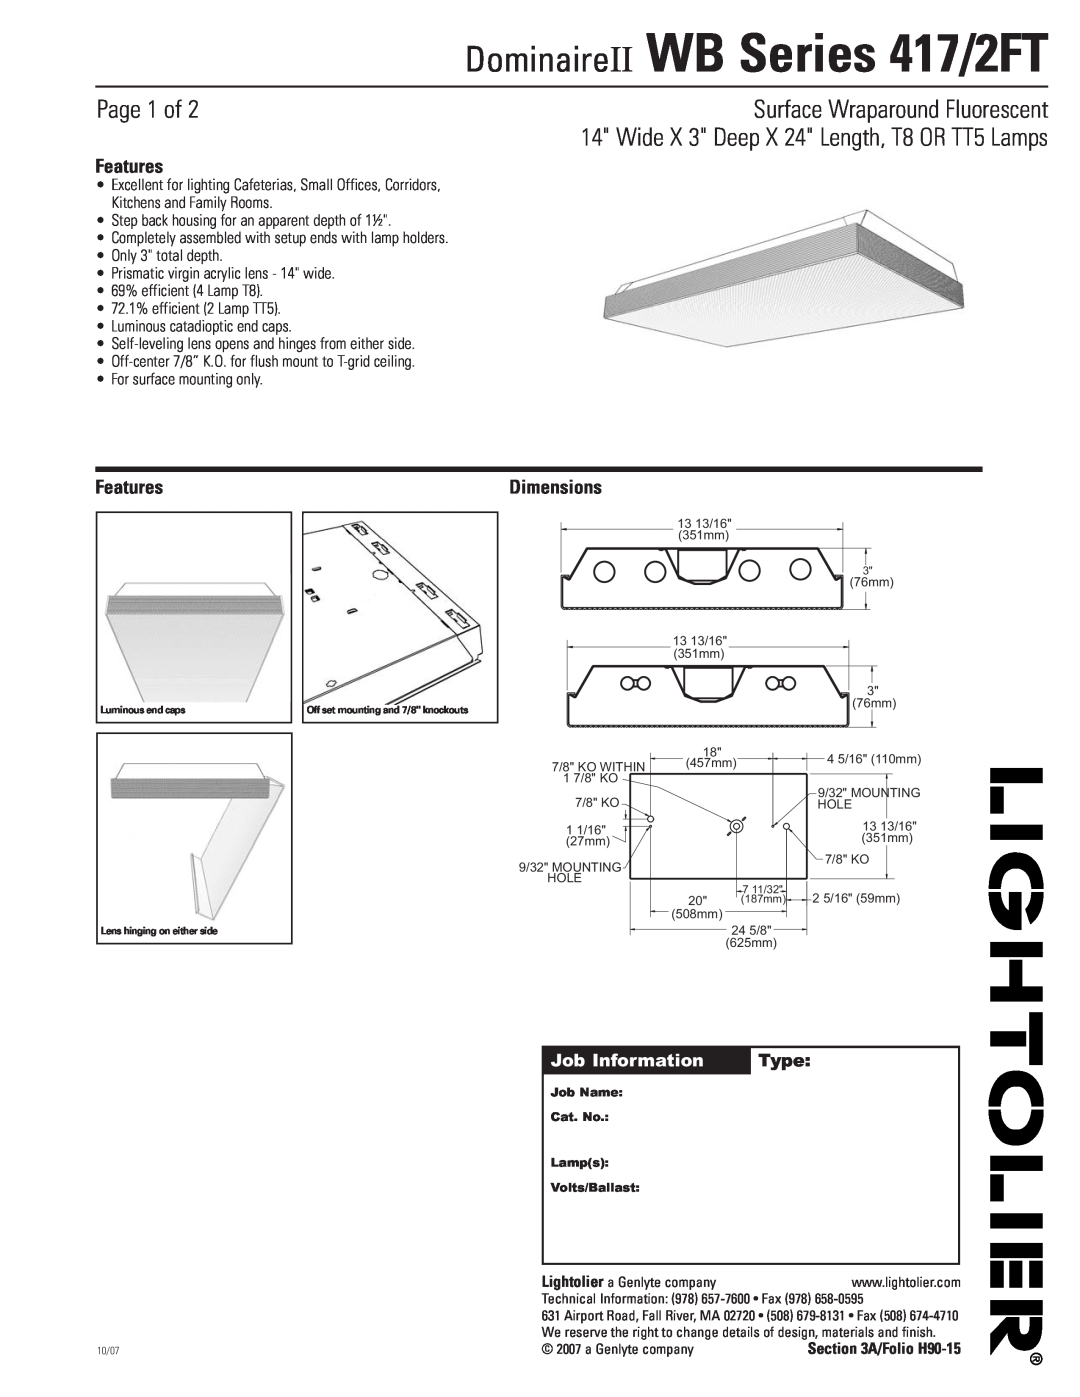 Lightolier WB Series 417 dimensions Page 1 of, Surface Wraparound Fluorescent, Features, Dimensions, Job Information, Type 